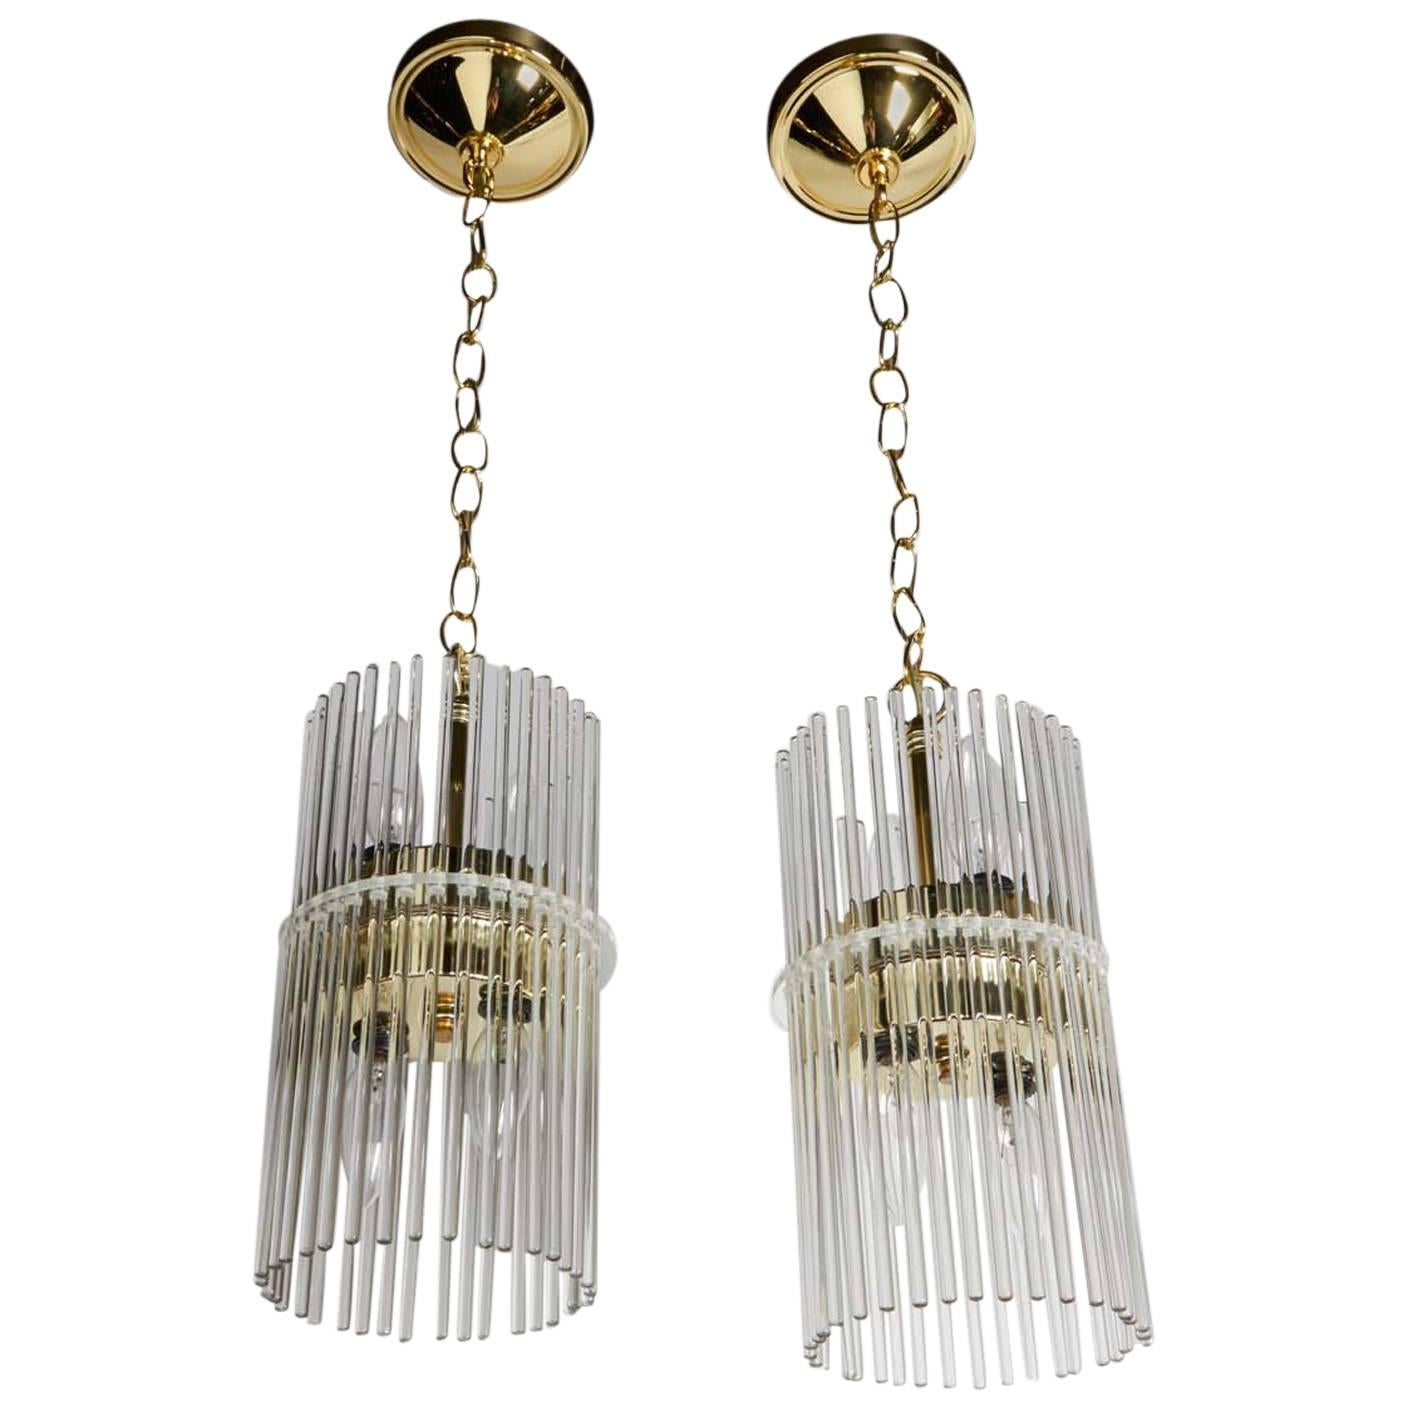 Pair of Mid-Century Modern Glass Rod Pendant Chandeliers by Lightolier